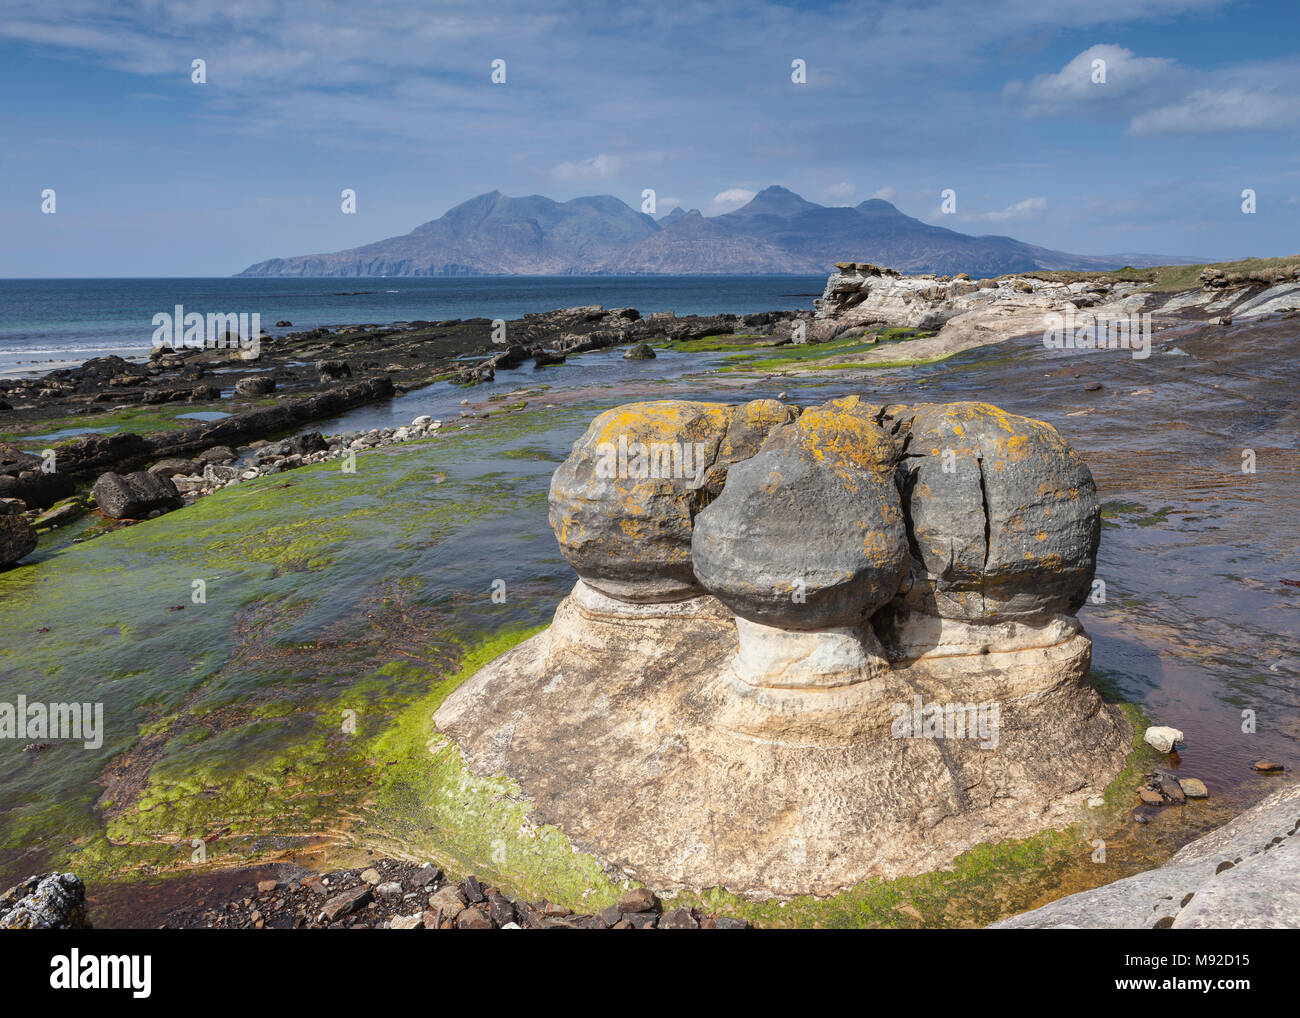 Sandstone concretions at the Bay of Laig on the Isle of Eigg, Inner Hebrides, Scotland. The mountains in the distance are on the Isle of Rum. Stock Photo